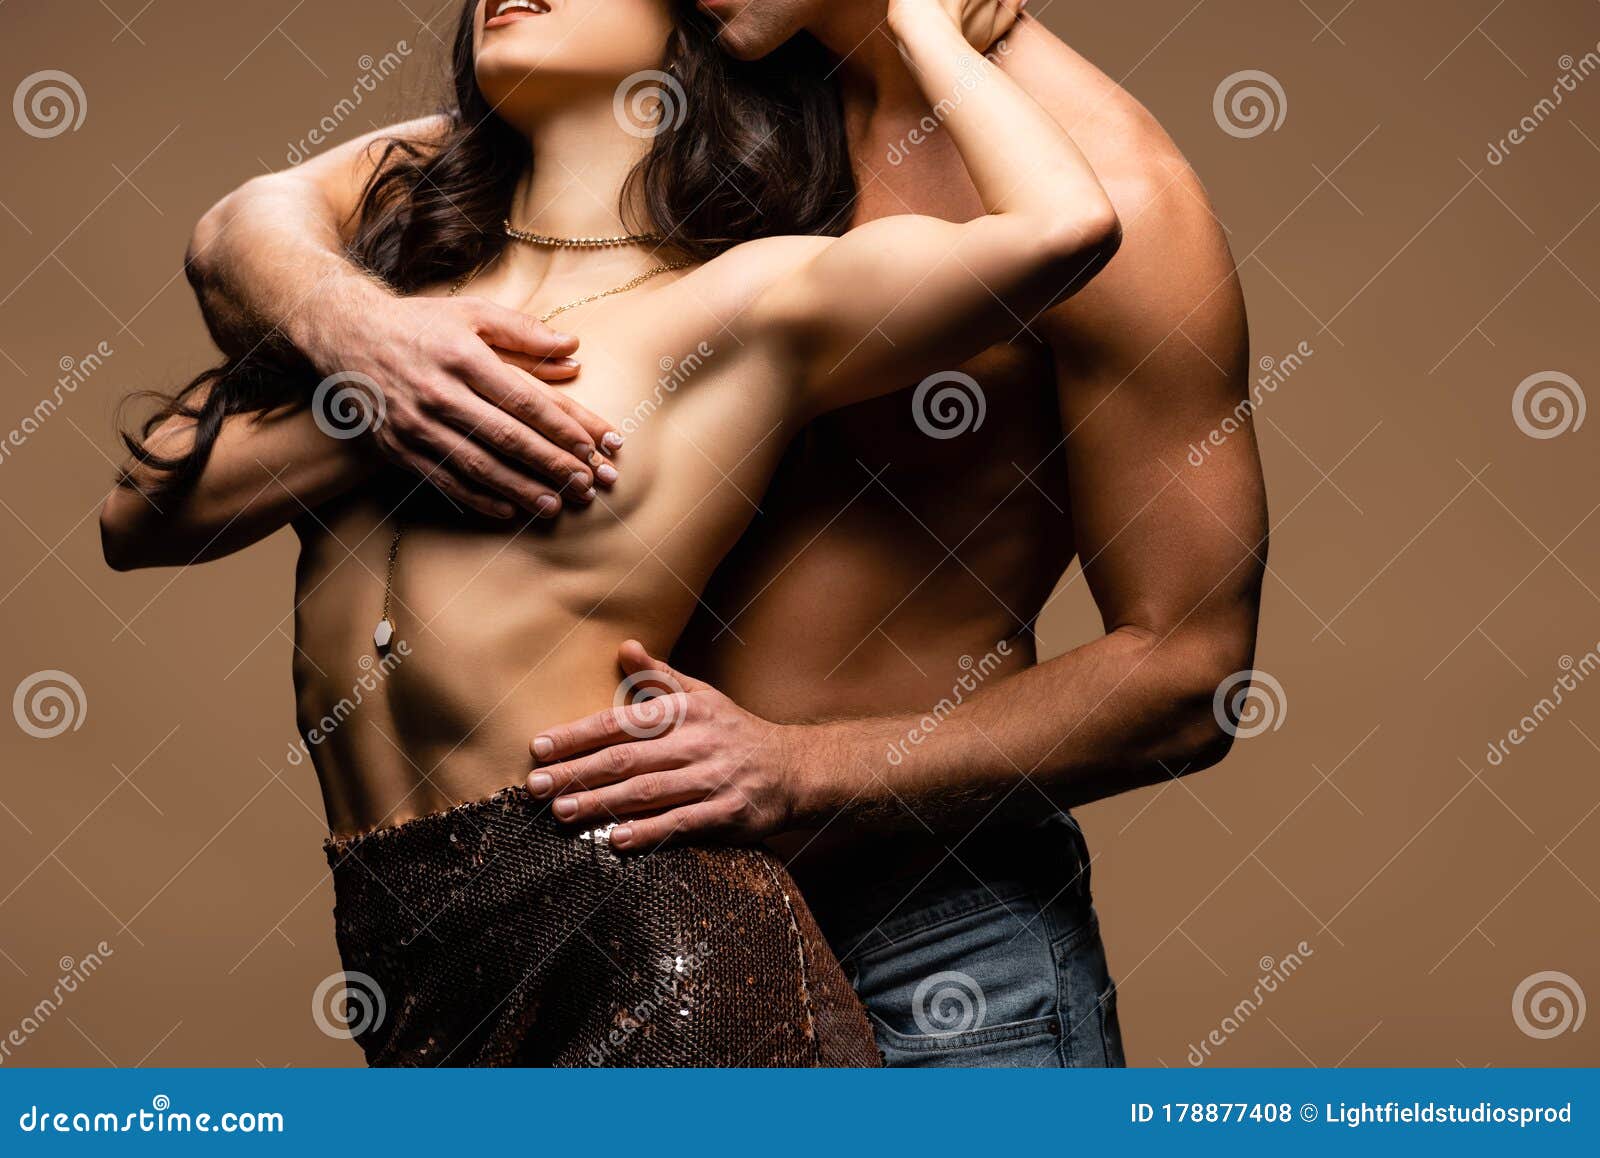 View of Shirtless Boyfriend Covering Breast of Seductive Half Naked Girlfriend in Paillettes Skirt Isolated on Beige Stock Photo